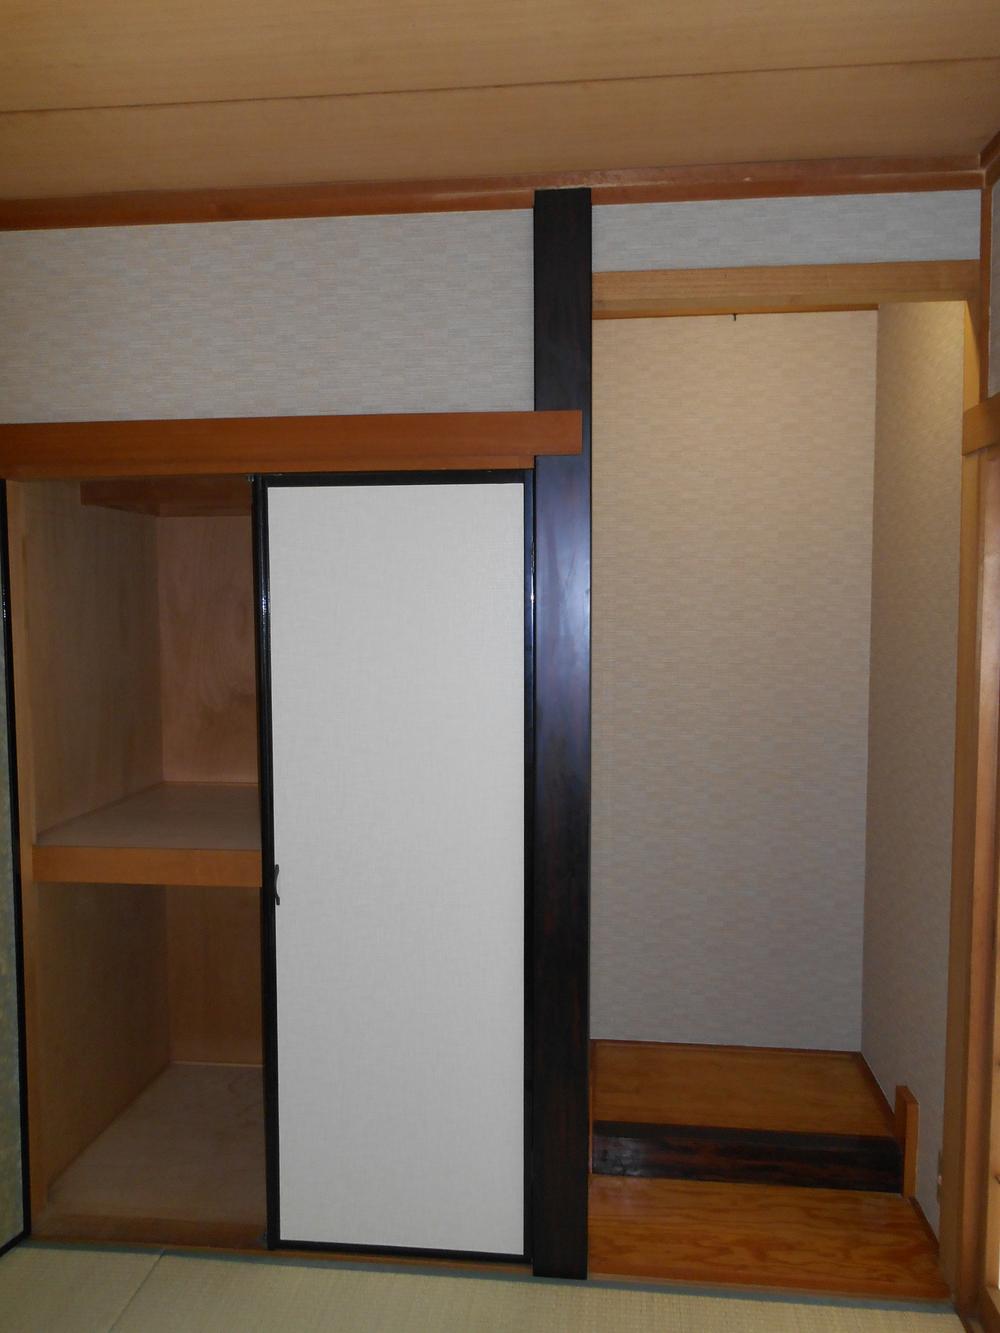 Receipt. First floor Japanese-style room ・ Storage alcove